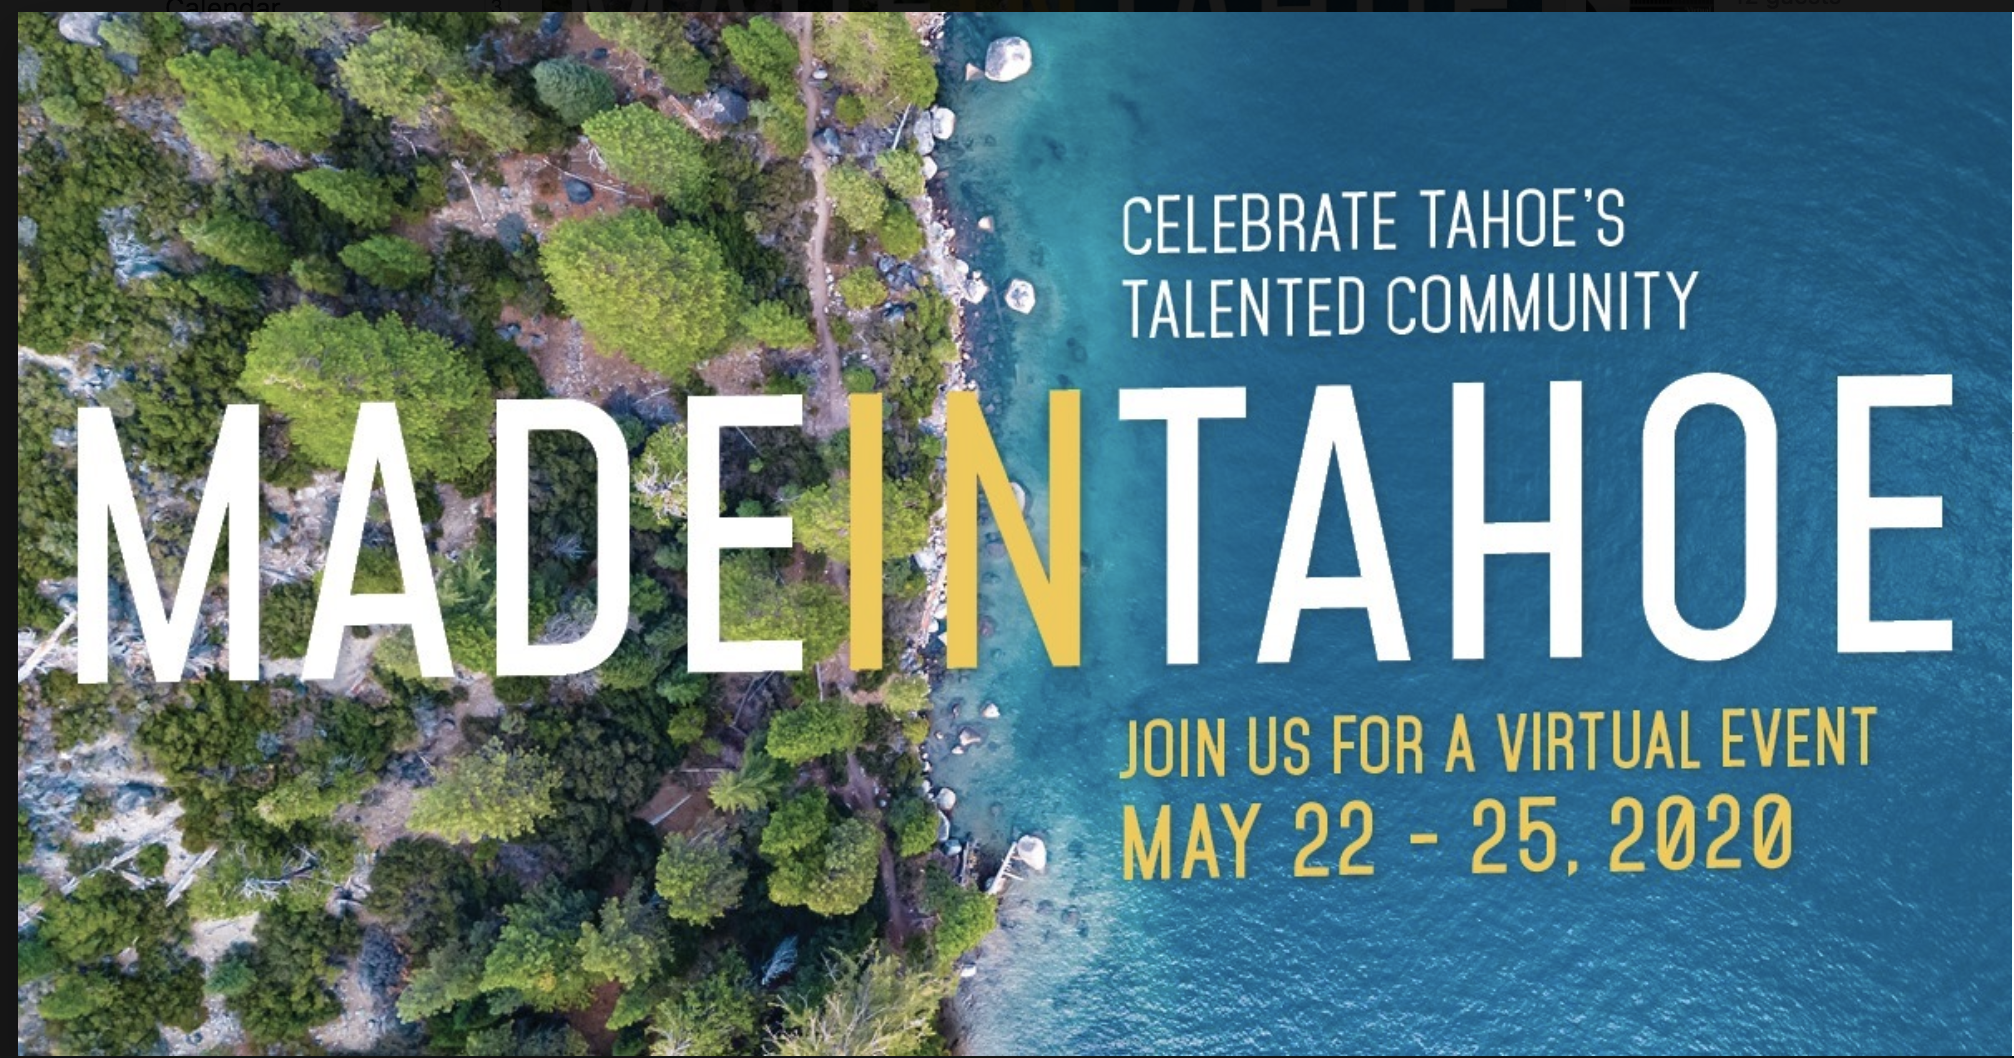 Made In Tahoe Virtual Event!